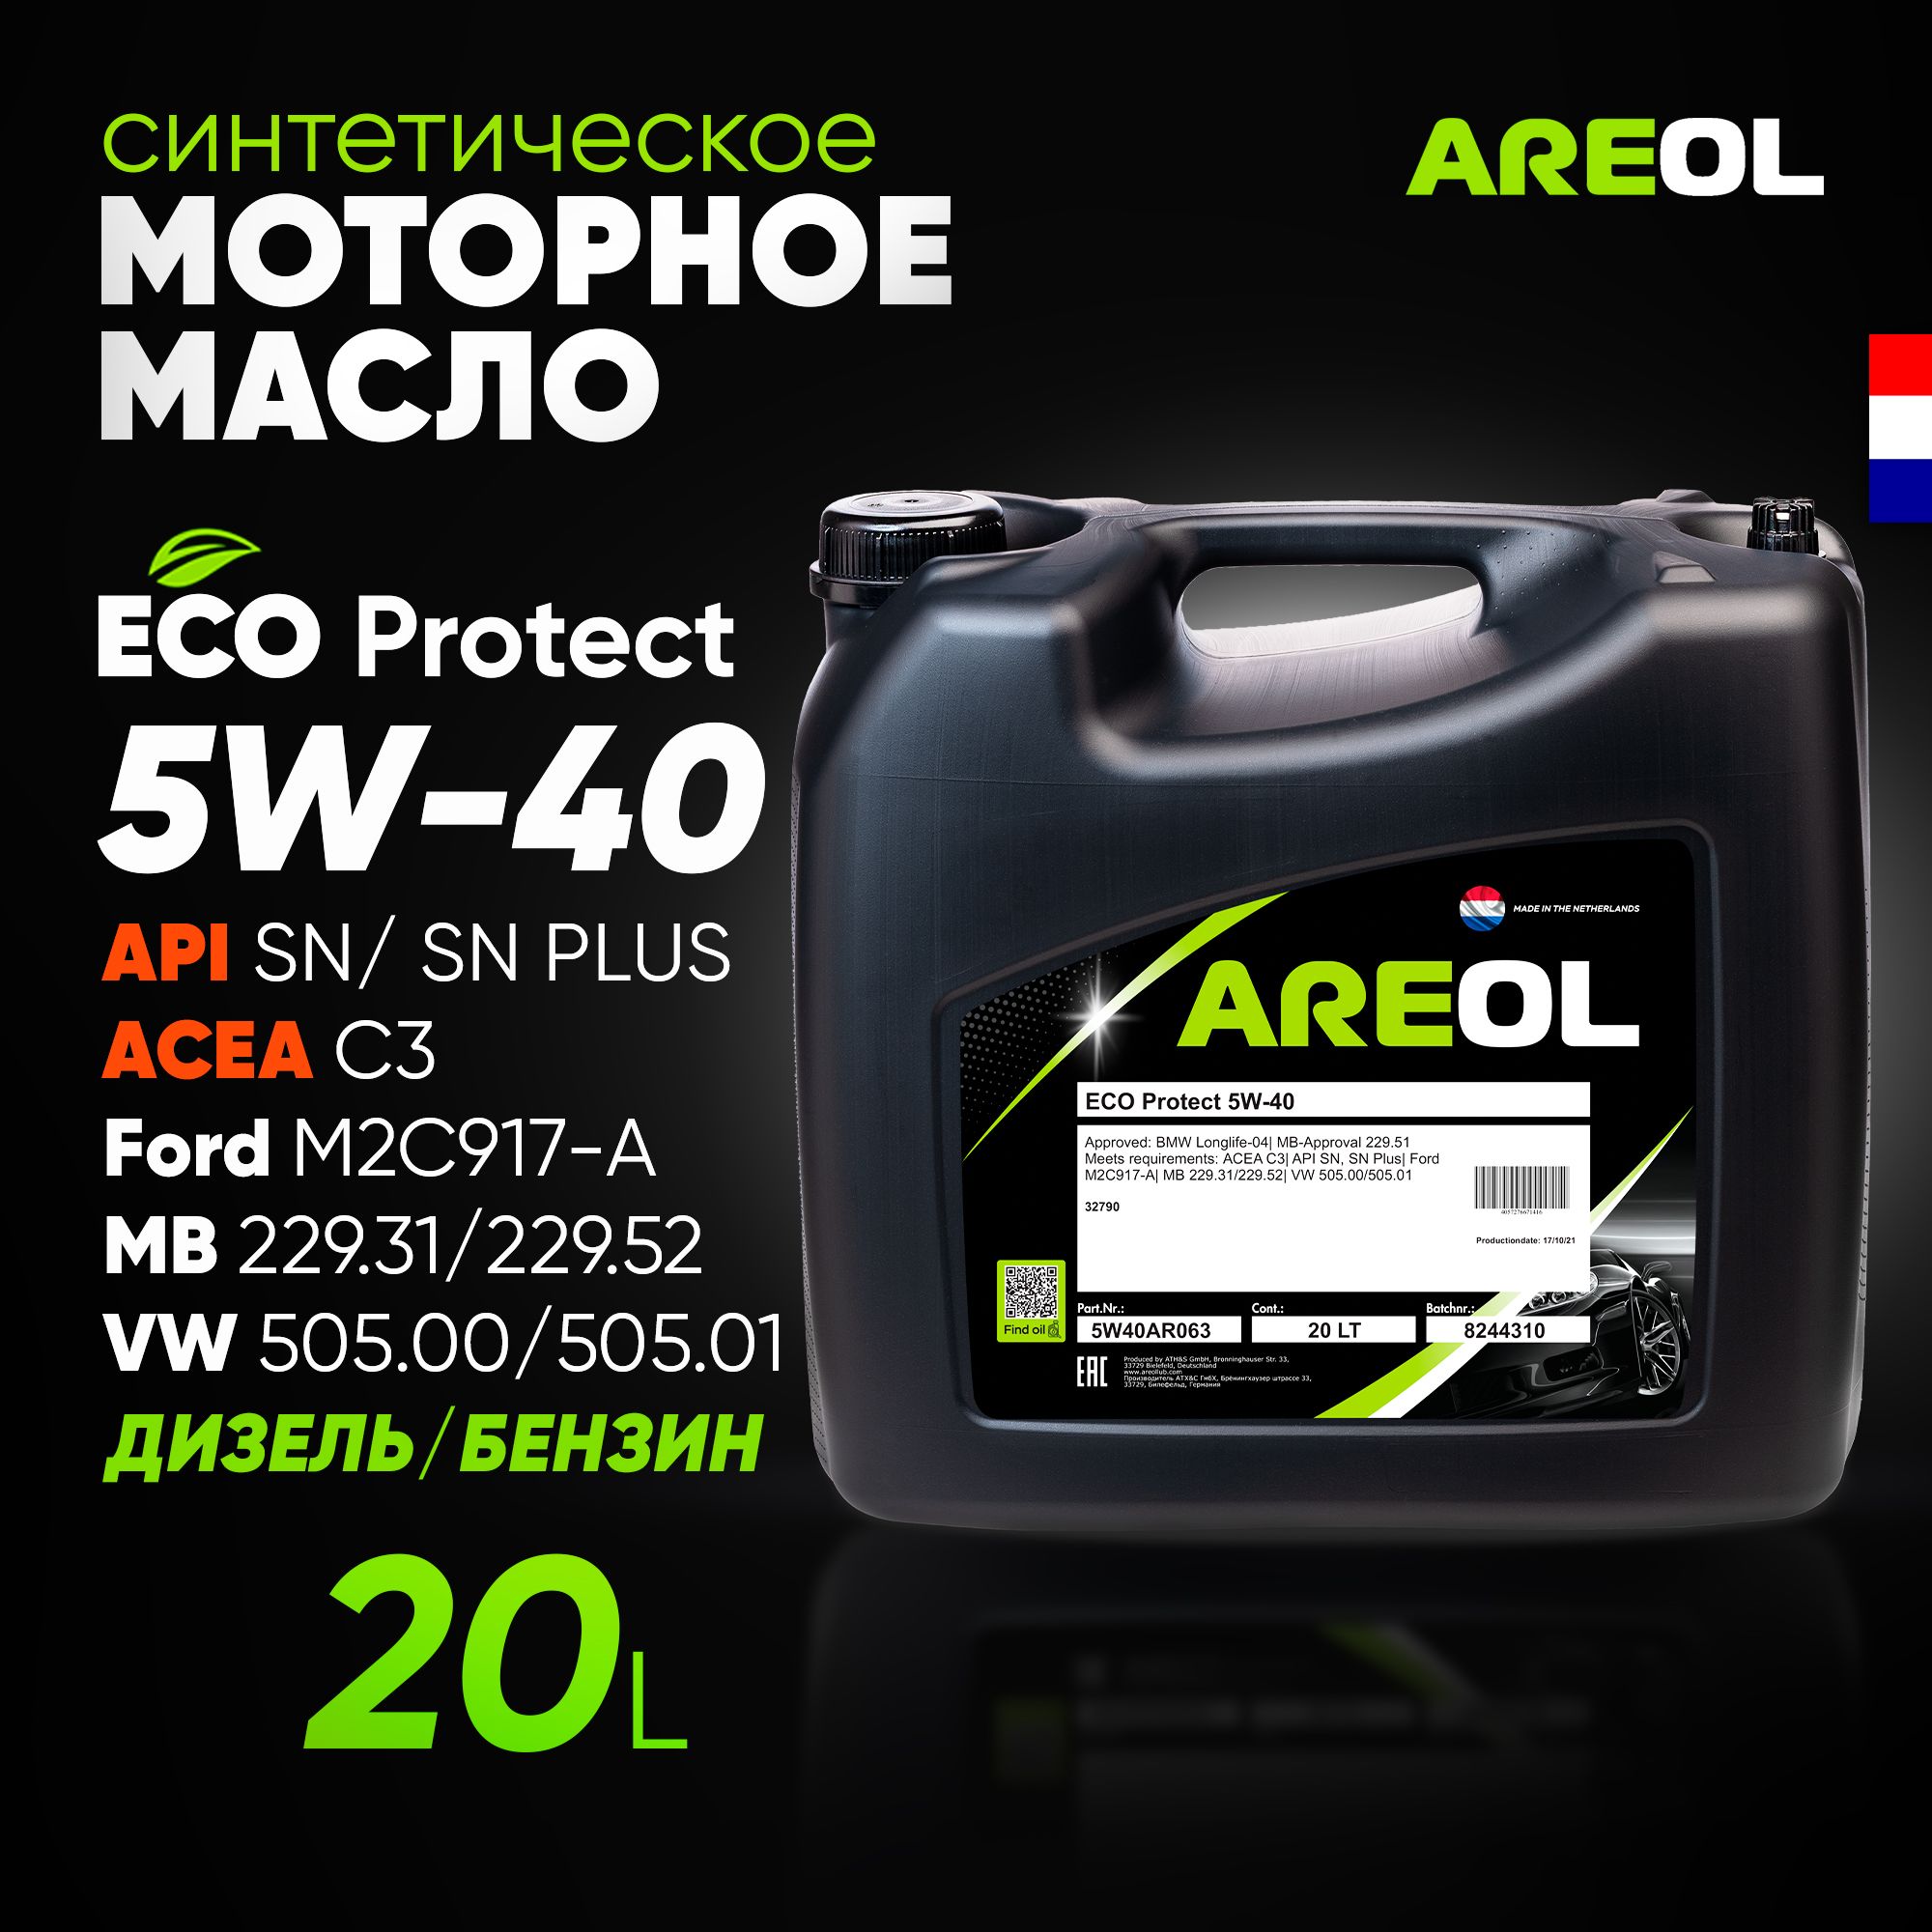 Areol 5w40ar009. Areol Max protect 5w-40 5l. Моторное масло areol 5w40 характеристики. Areol Eco protect 5w-40 205л. Areol 5w40 масло